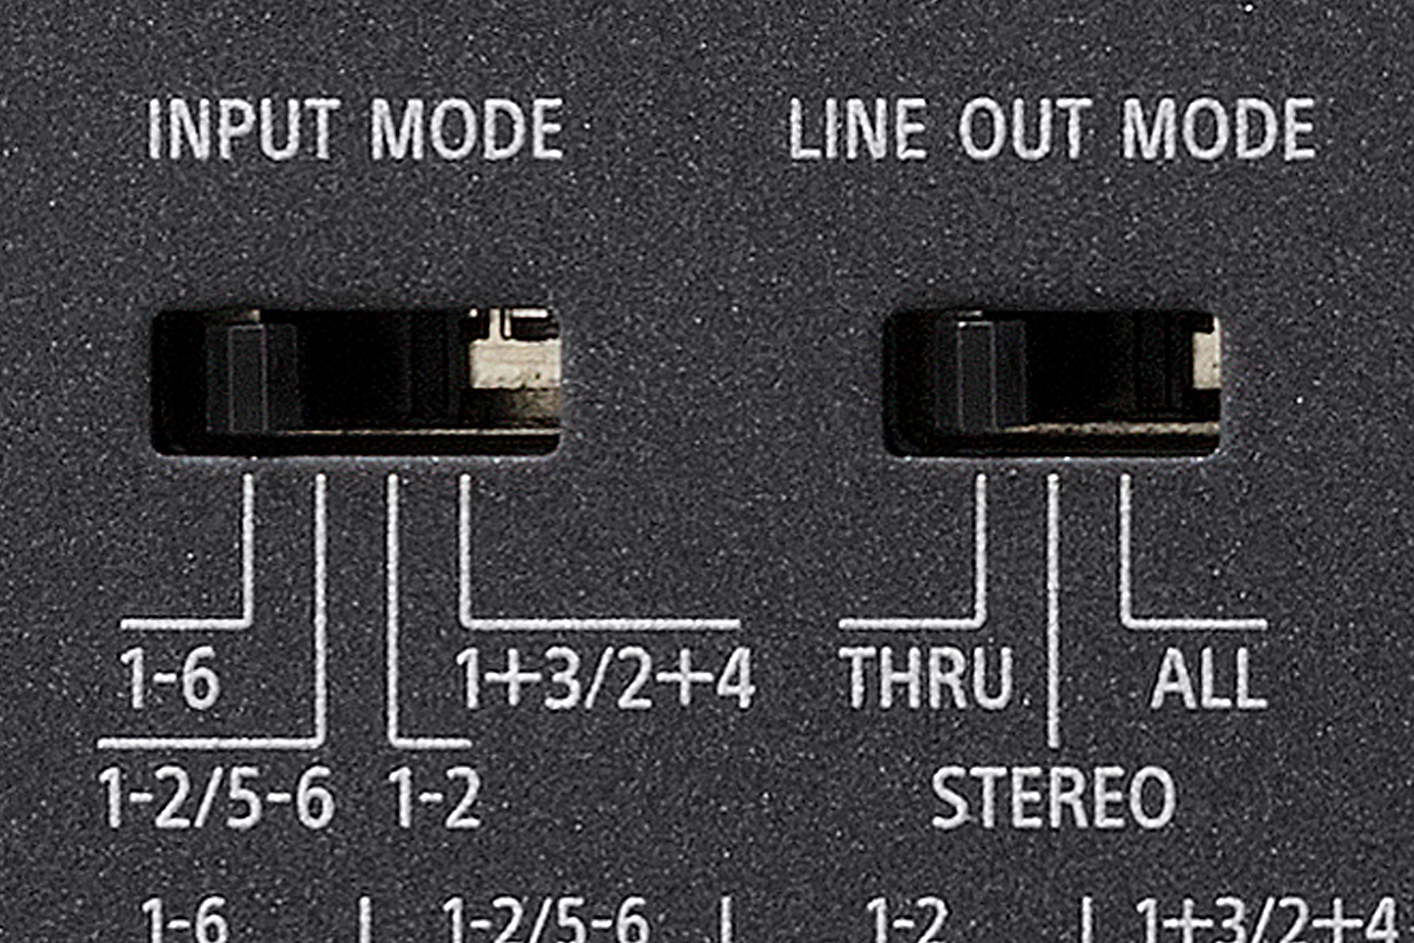 Close up image of input mode and line out mode switches